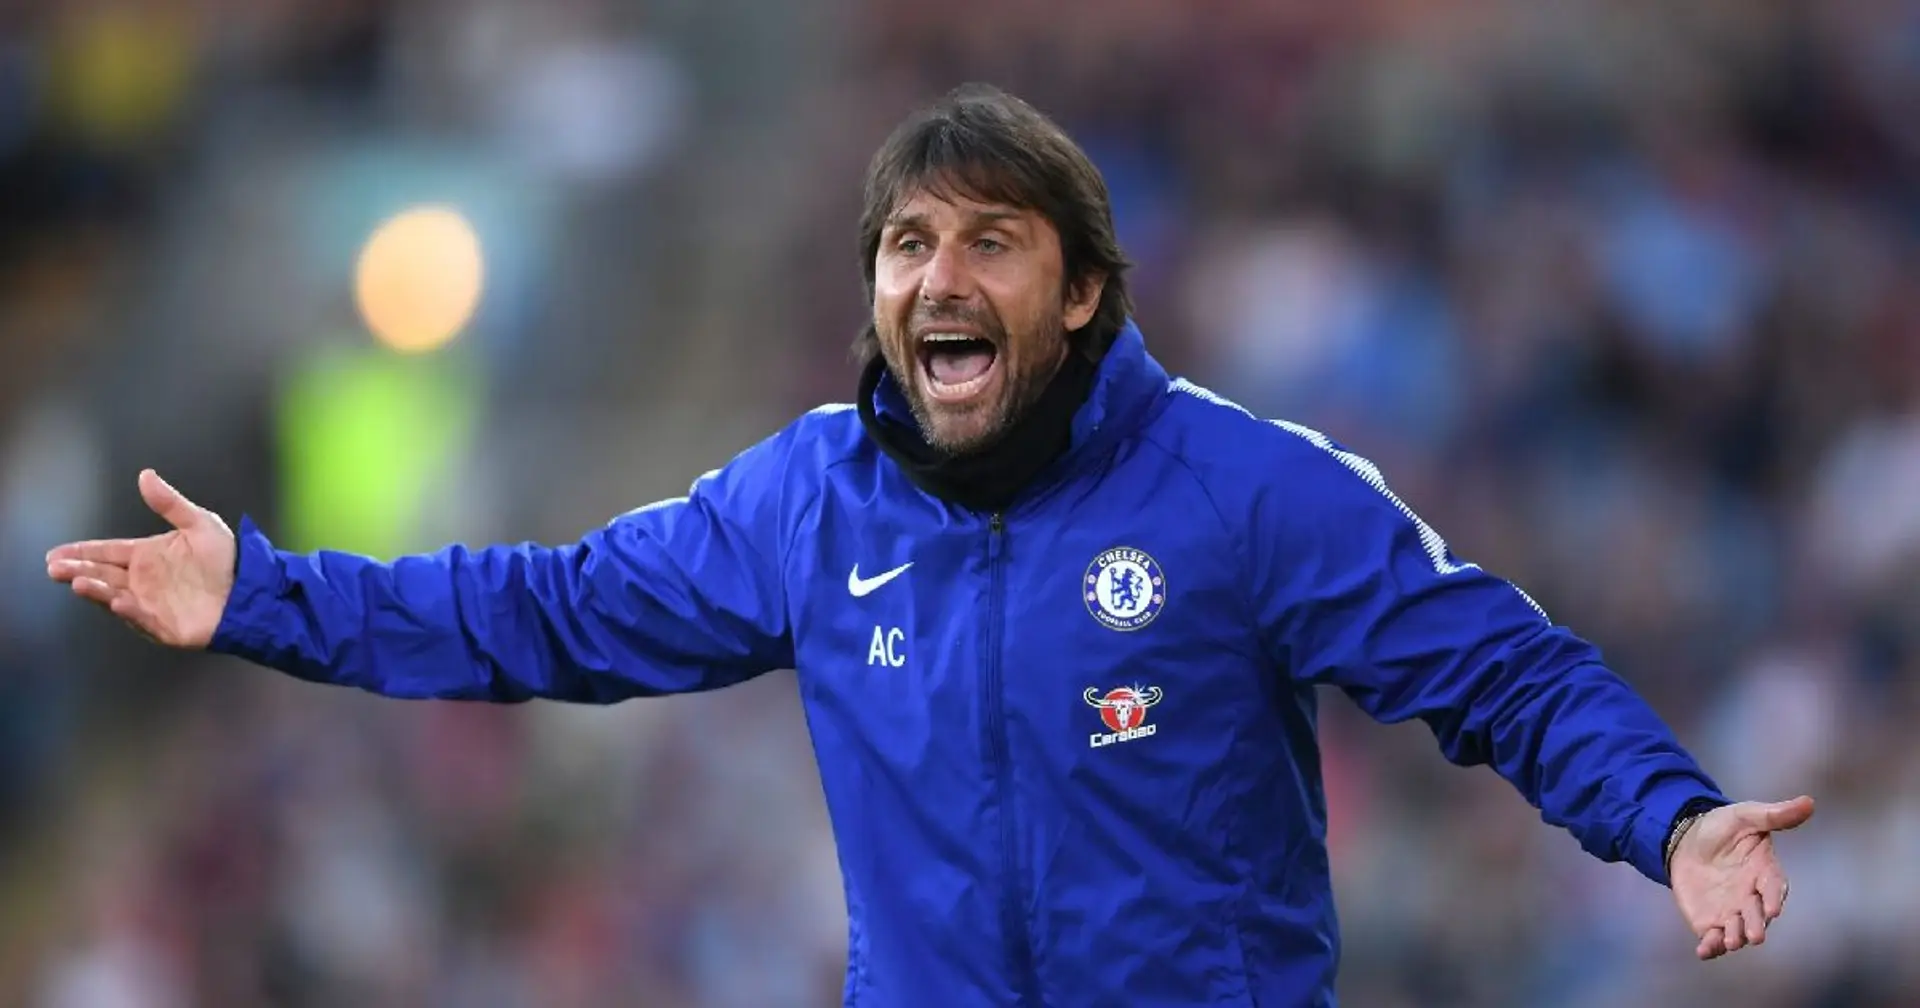 'If a player doesn't have a good attitude I prefer to kill him': Antonio Conte knows what it means to be professional